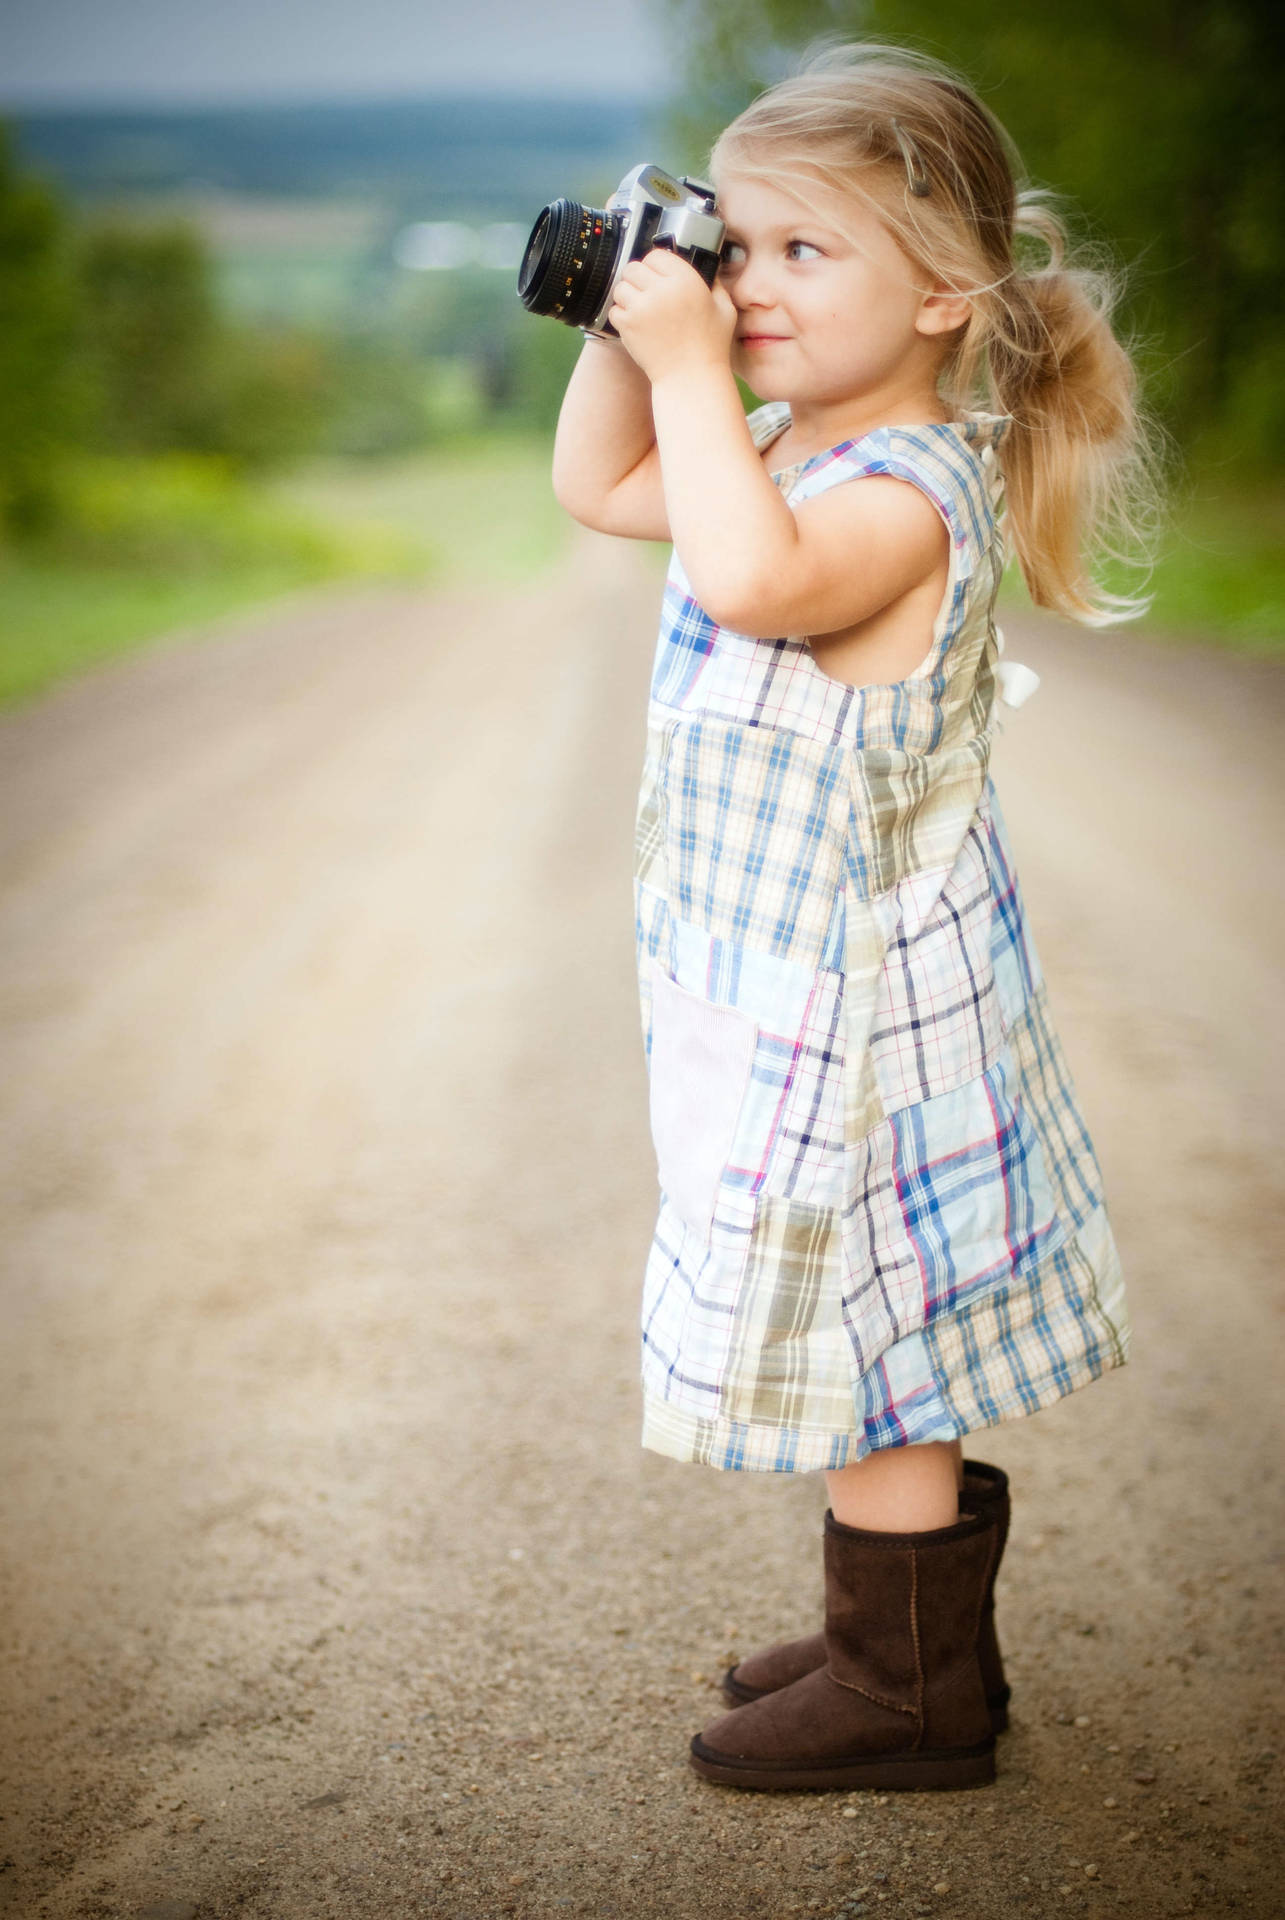 Cute Girl With Boots Taking Photos Wallpaper